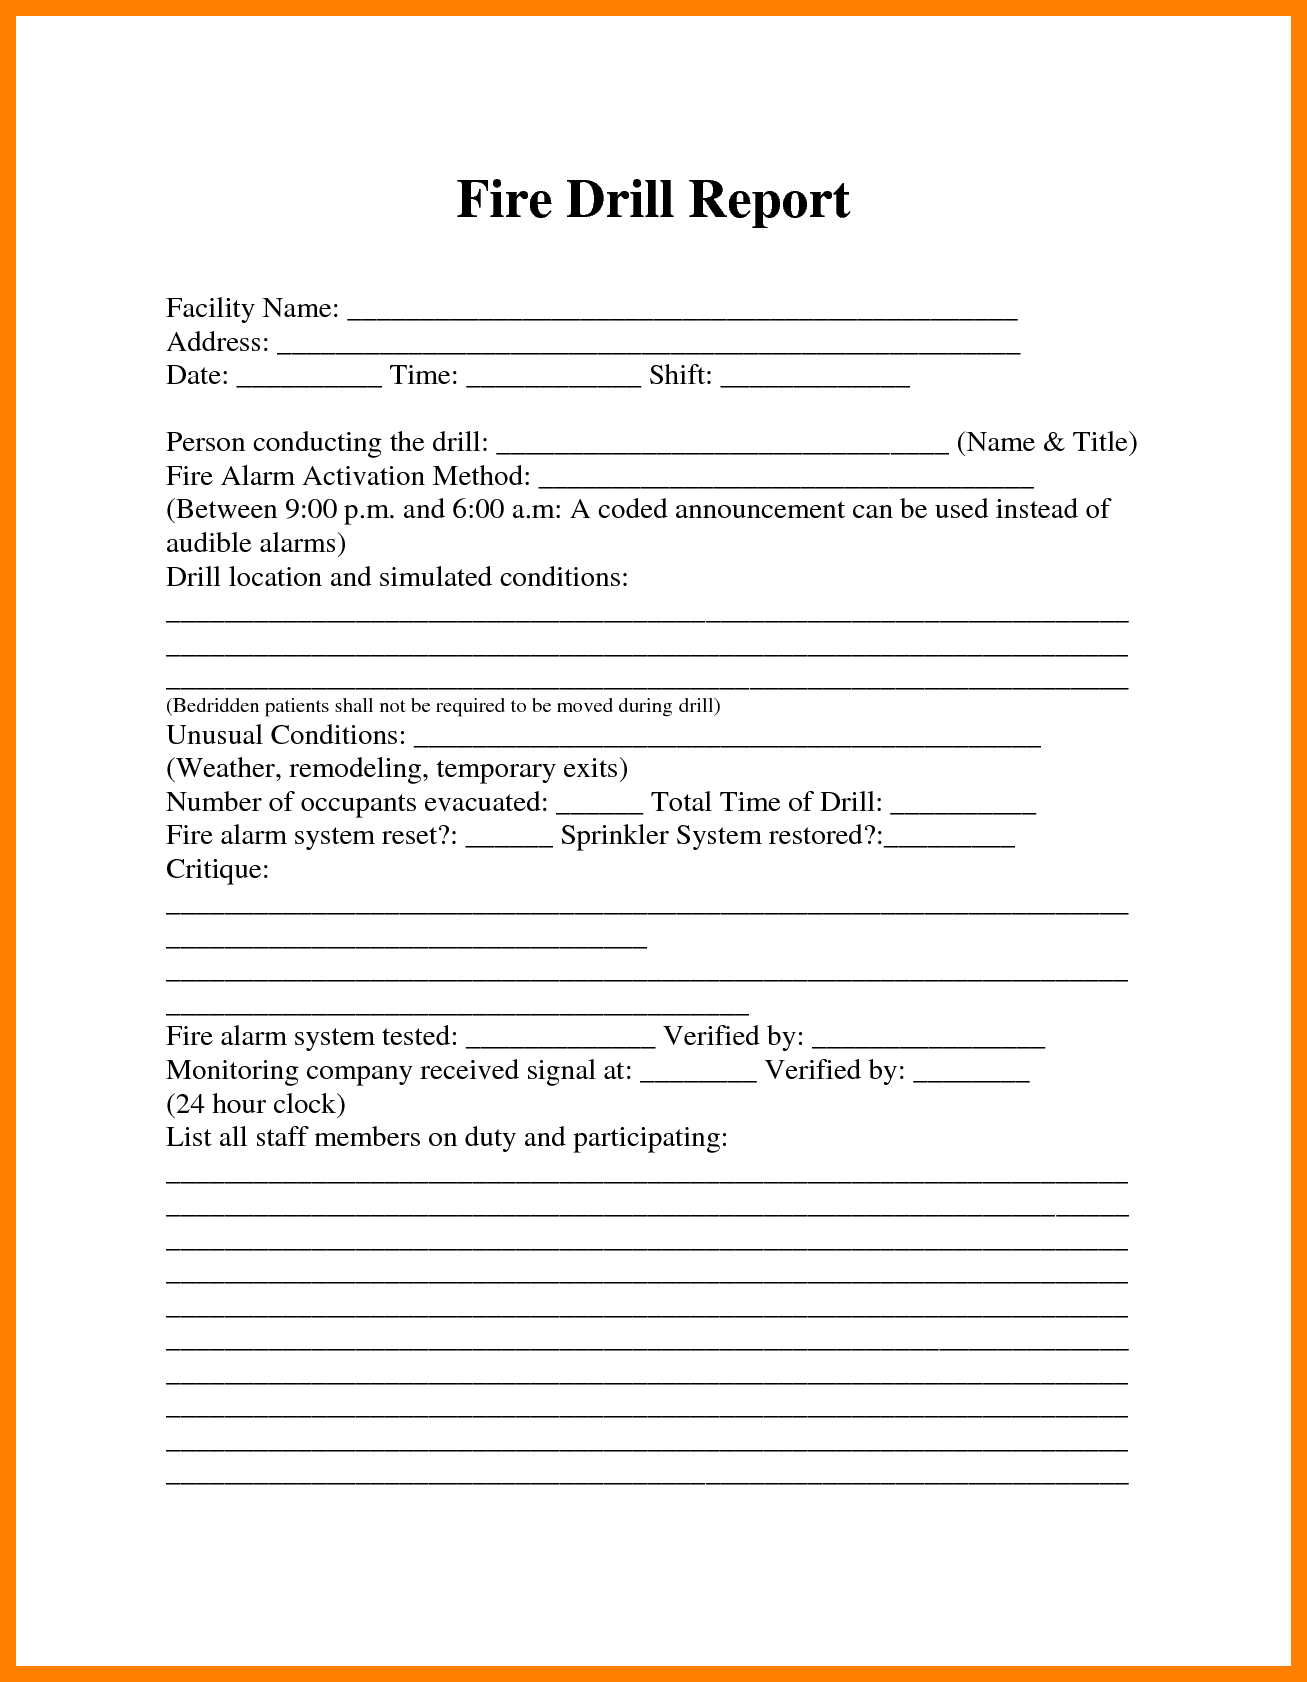 Image Result For Fire Drill Procedures For Summer Camp Regarding Emergency Drill Report Template